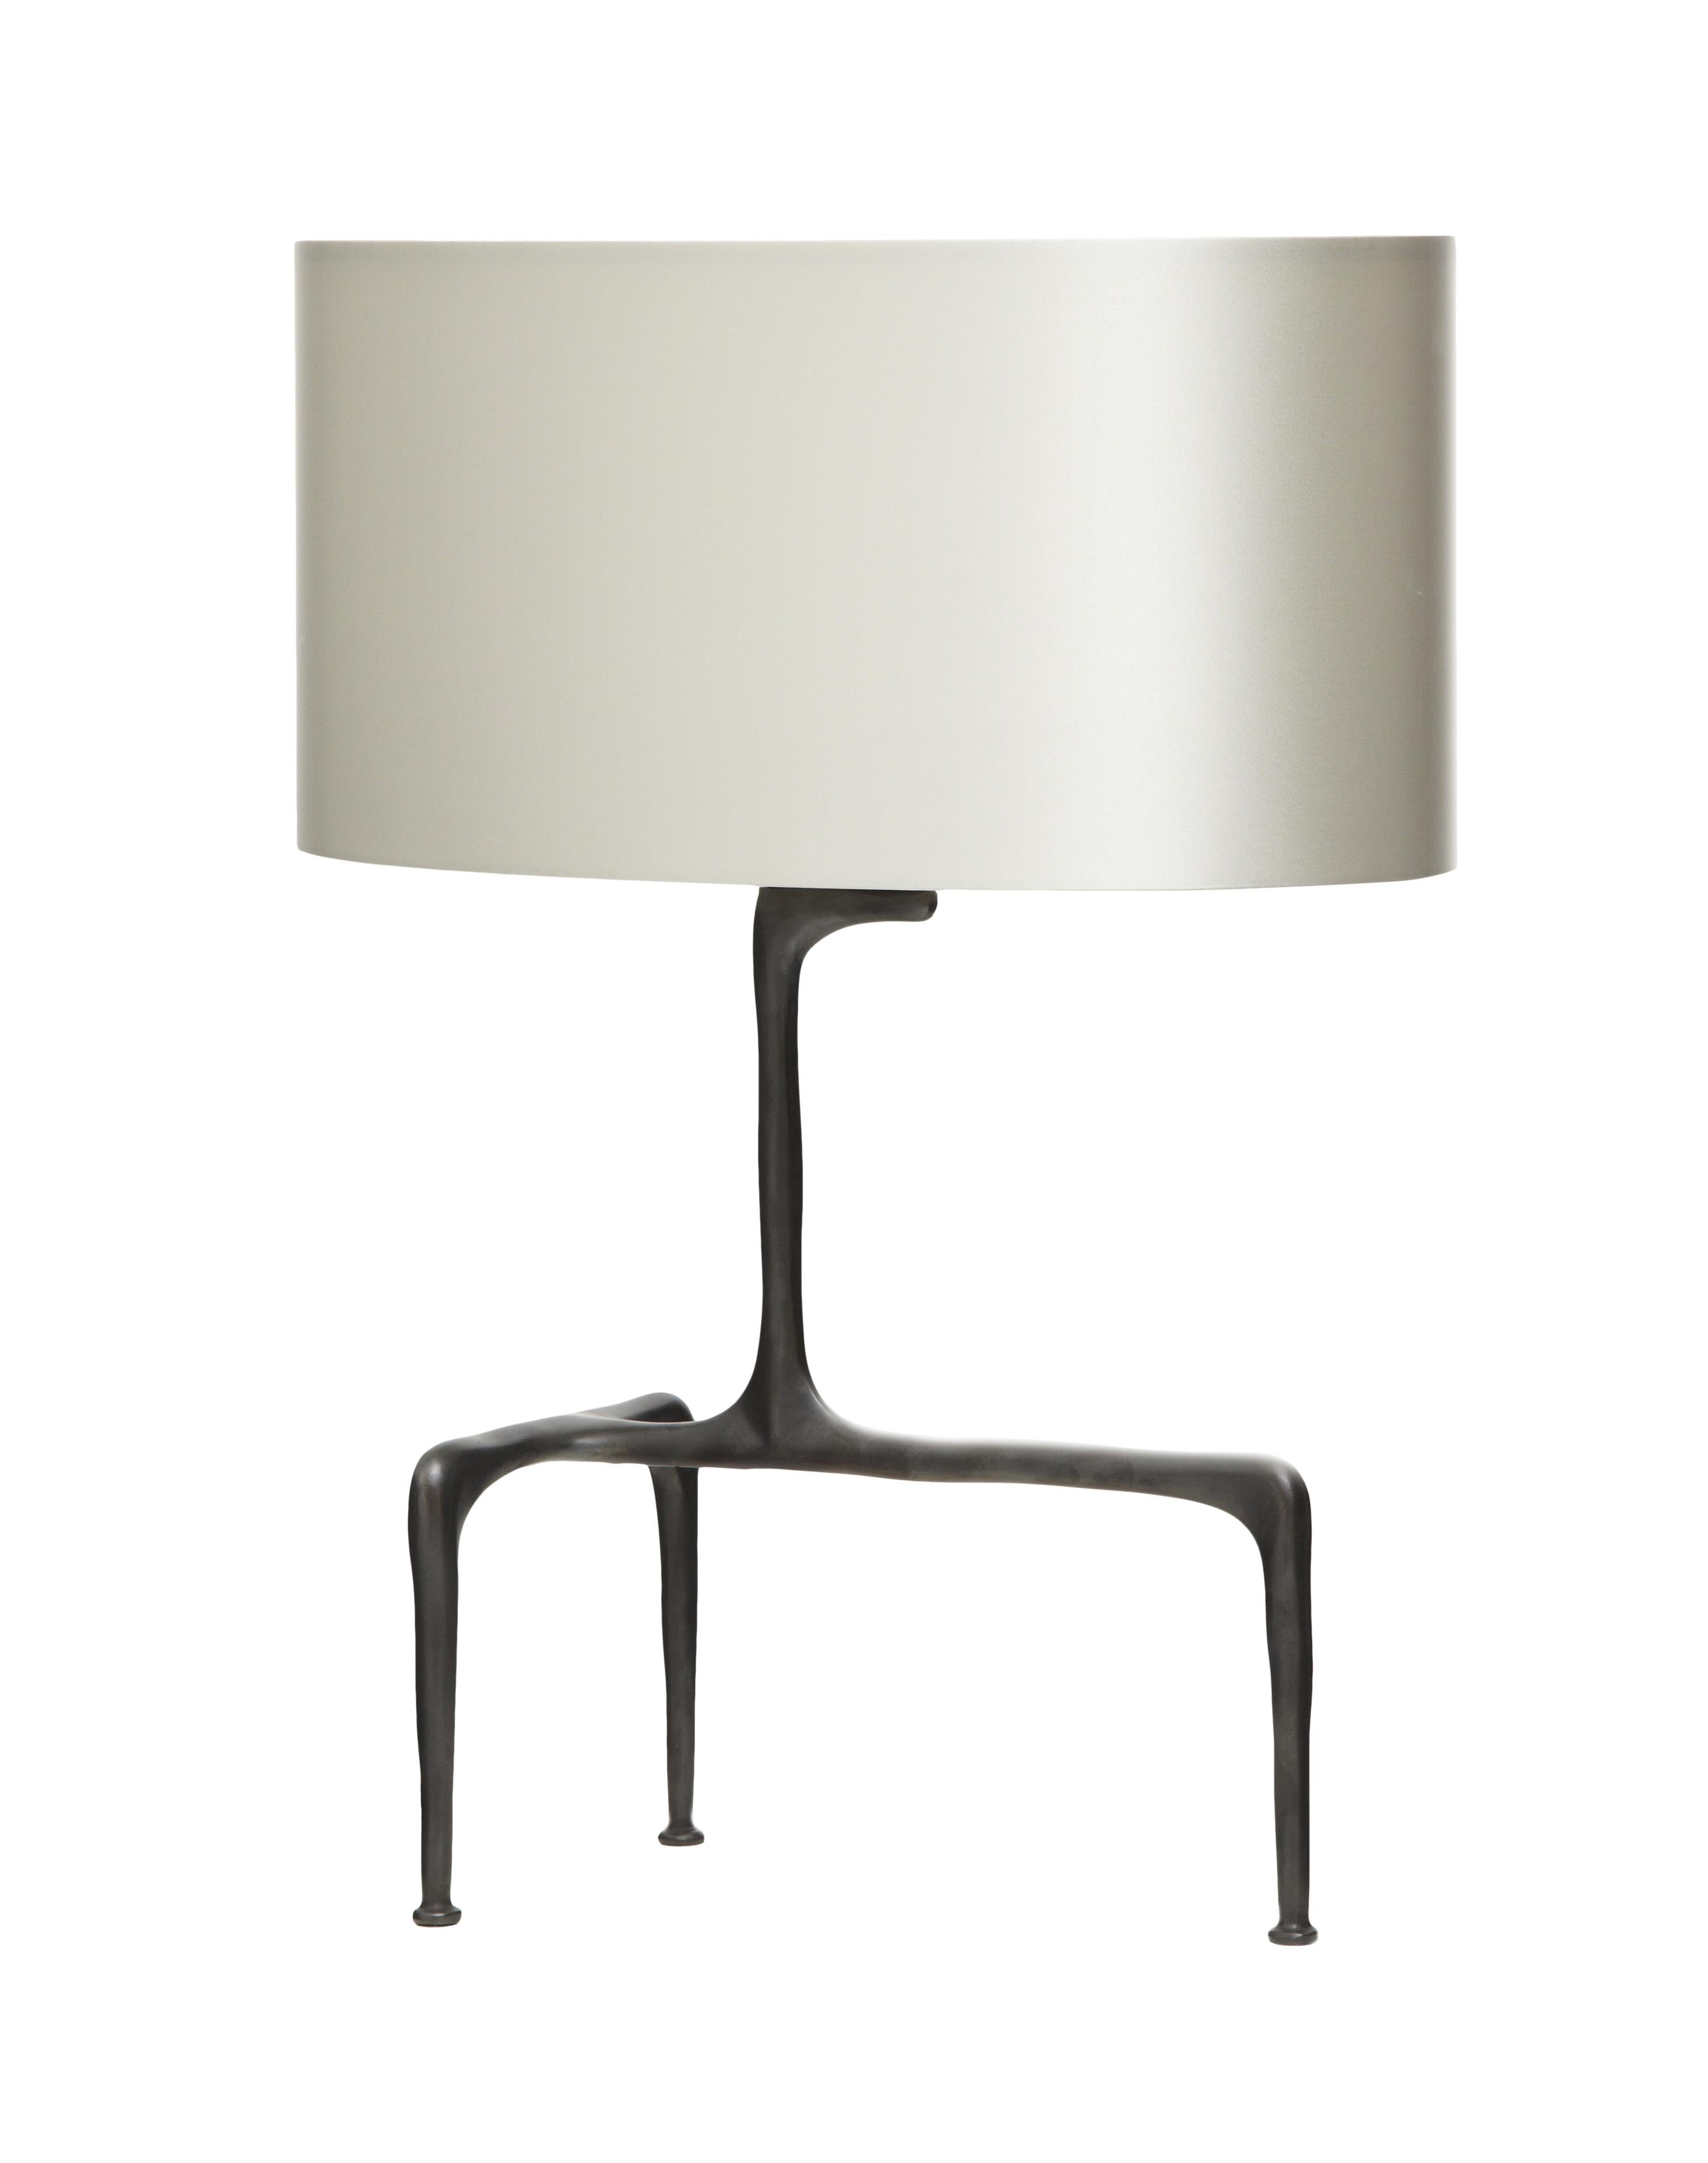 Braque table lamp by CTO lighting
Materials: bronze base with dove grey silk shade and silk diffuser
Dimensions: W 40 x D 40 x H 53.5 cm

1 x E26, 60w max (or 8w LED 2700k)
weight 2kg (4.4lbs)
2000mm (78.8”) cordset with black flex and inline dimmer